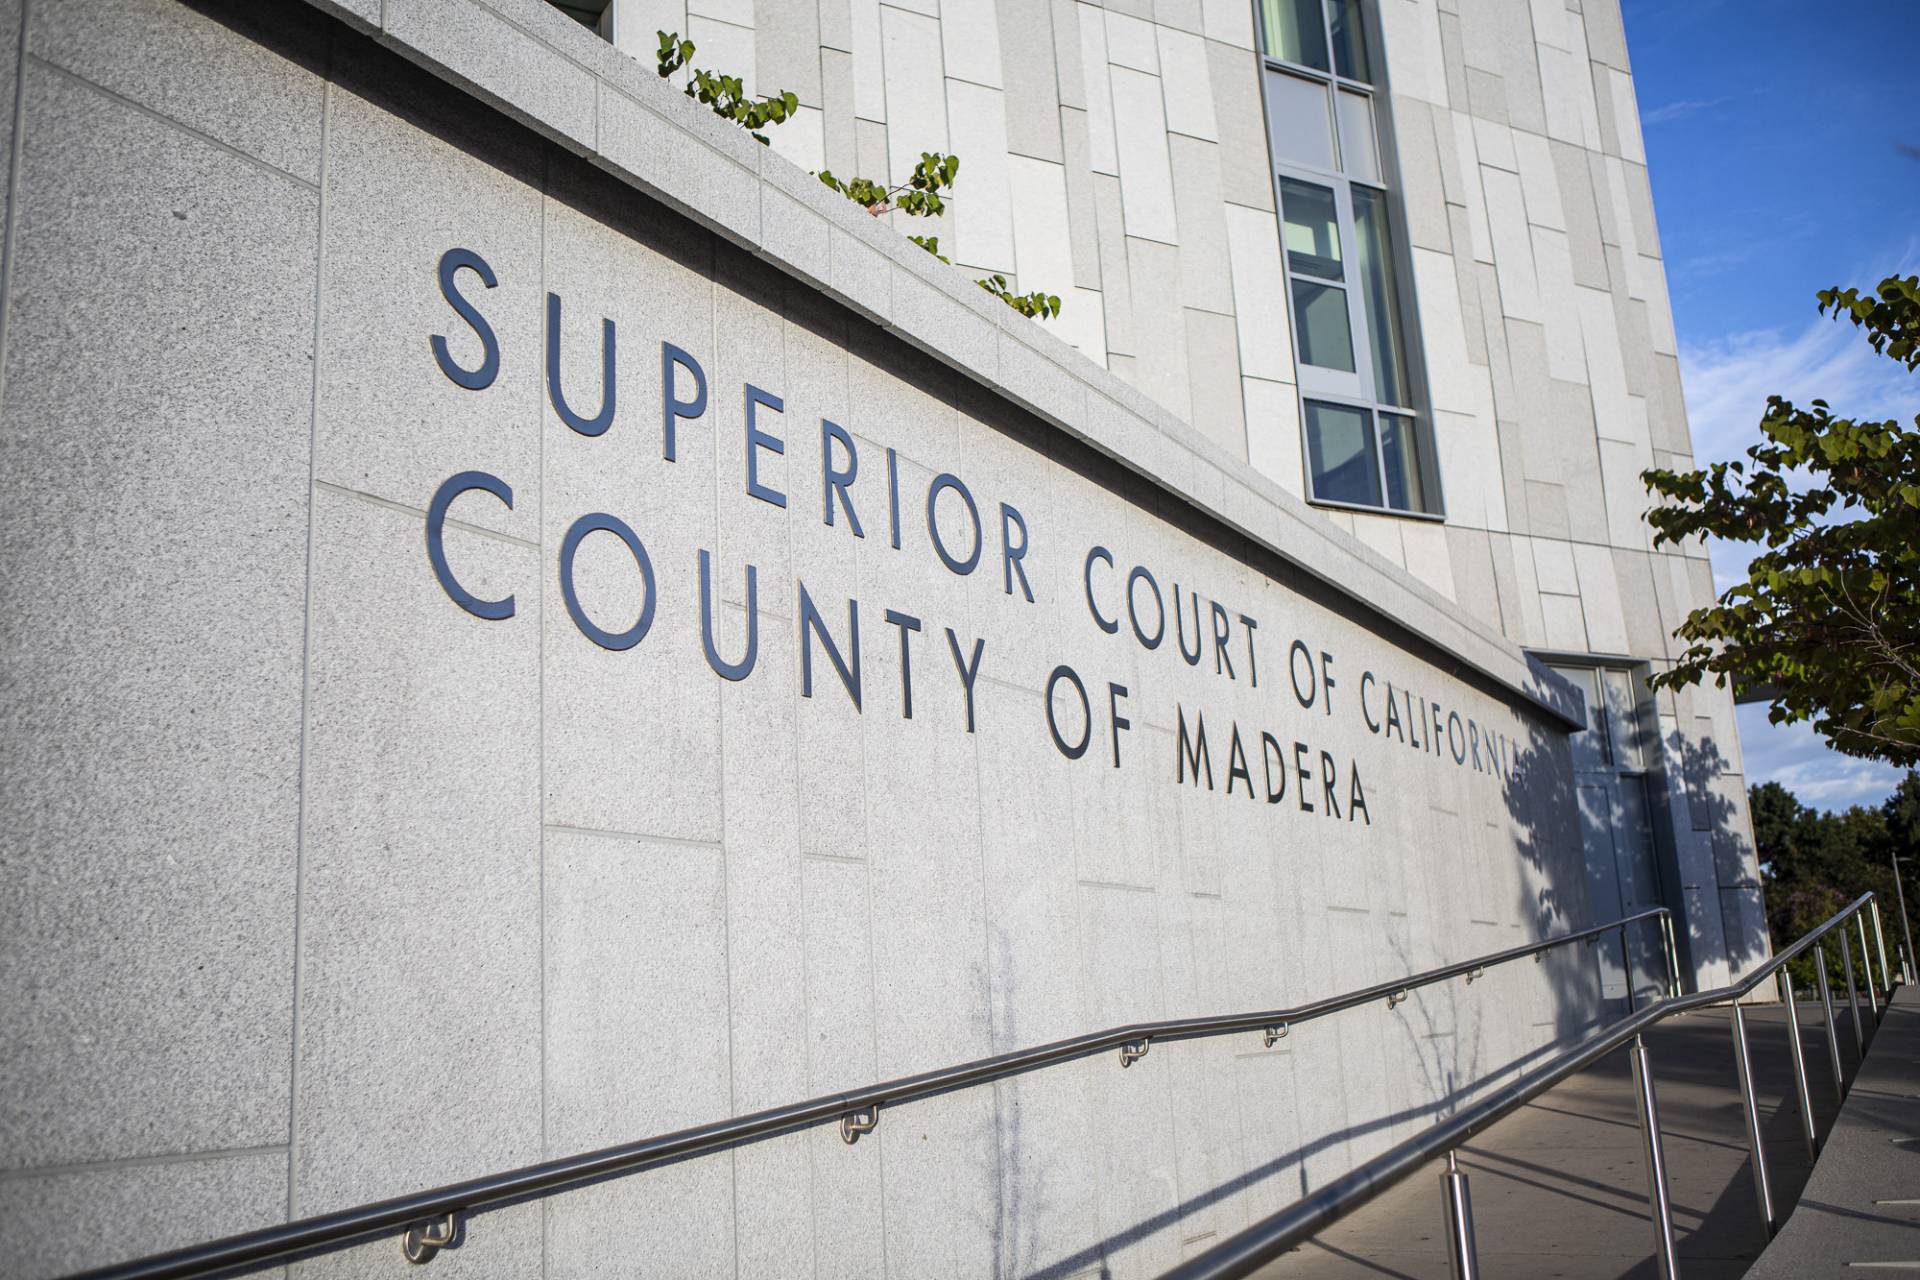 The outside of a building that says "Superior Court of California County of Madera."